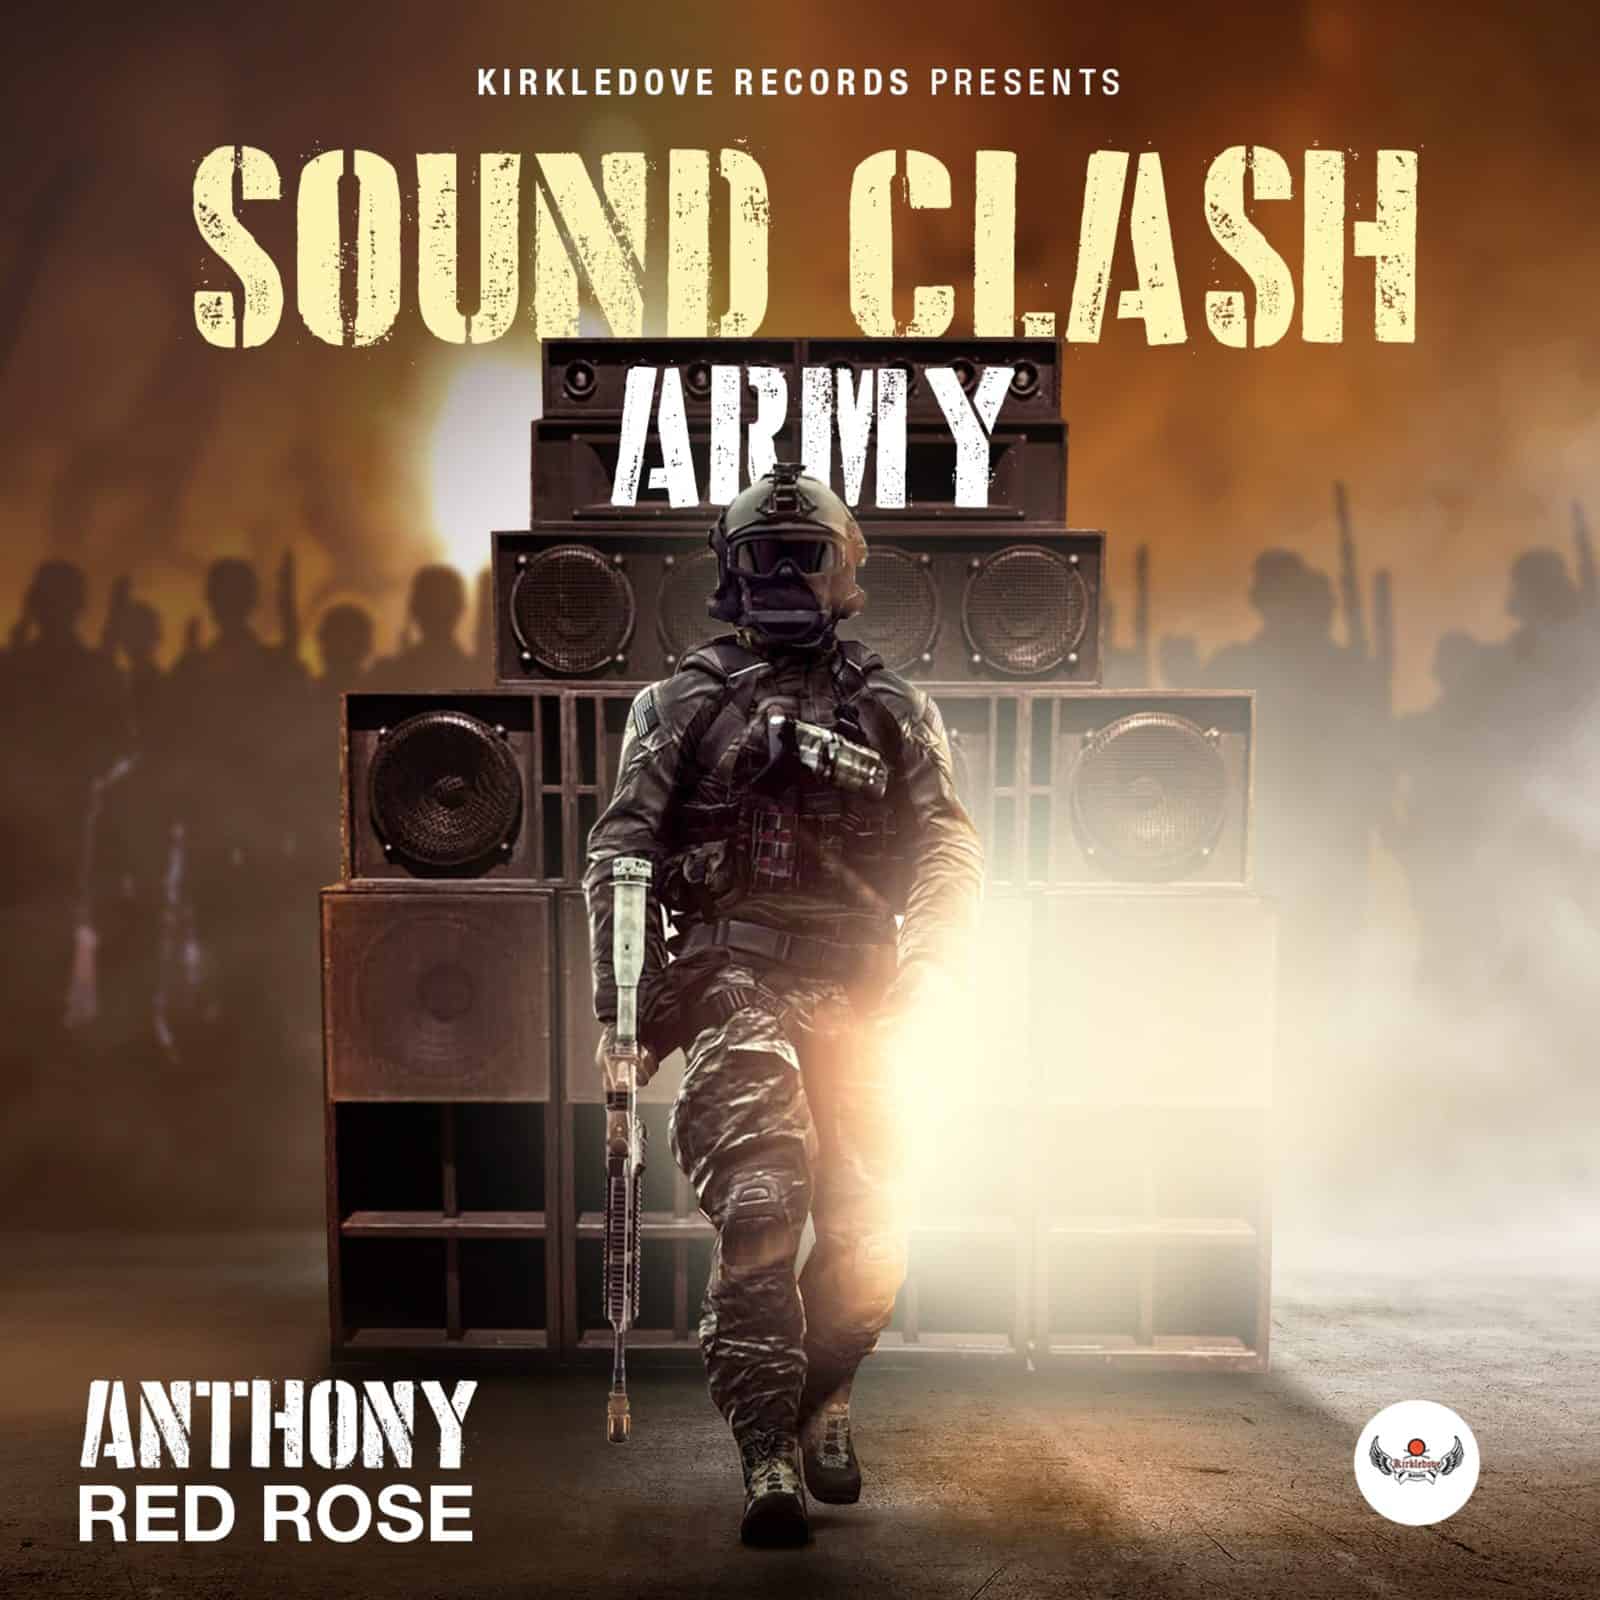 Sound Clash Army – Anthony Red Rose